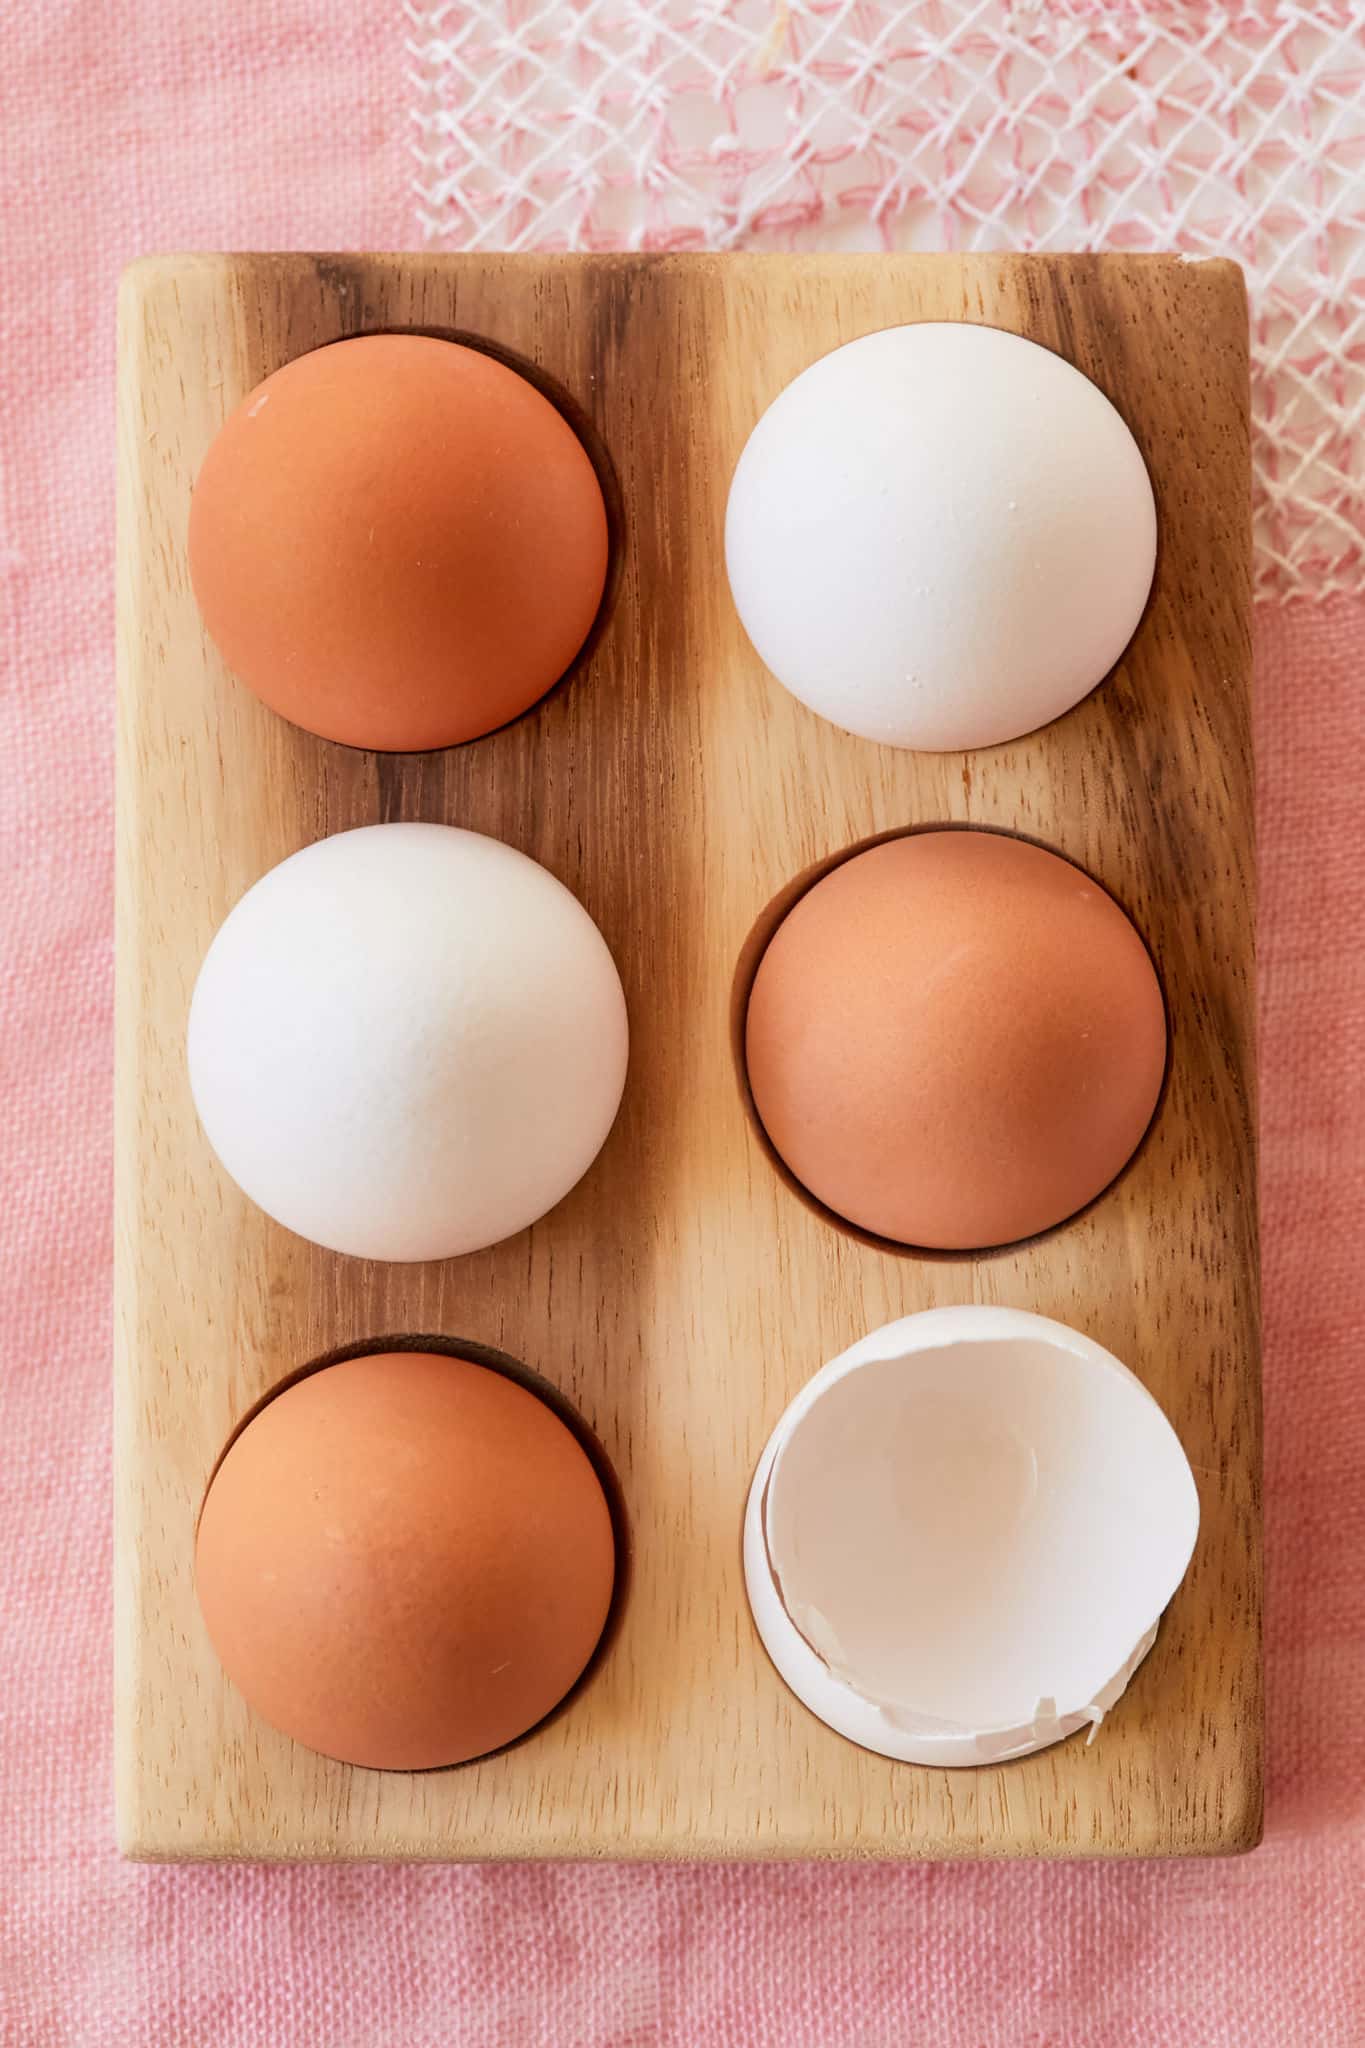 Top down shot of eggs in a holder